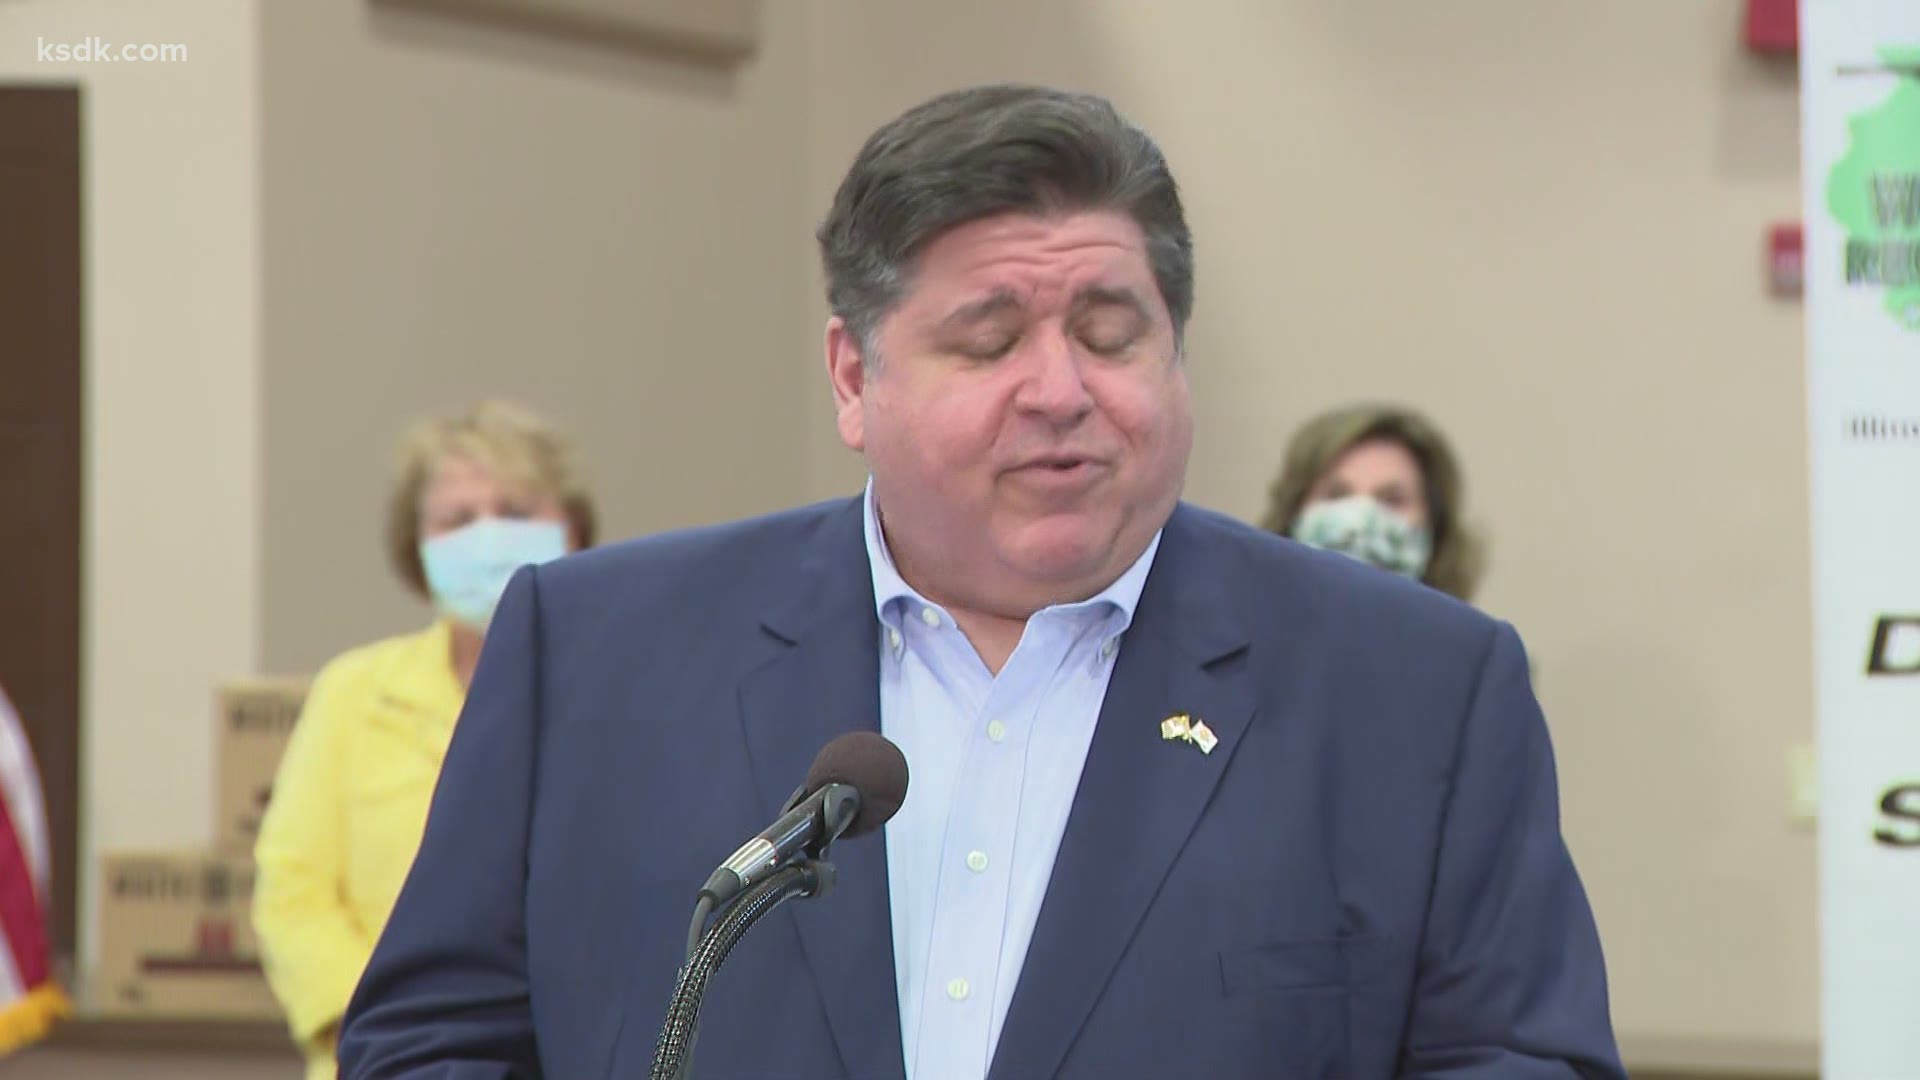 Pritzker visited Sparta, Illinois Tuesday afternoon